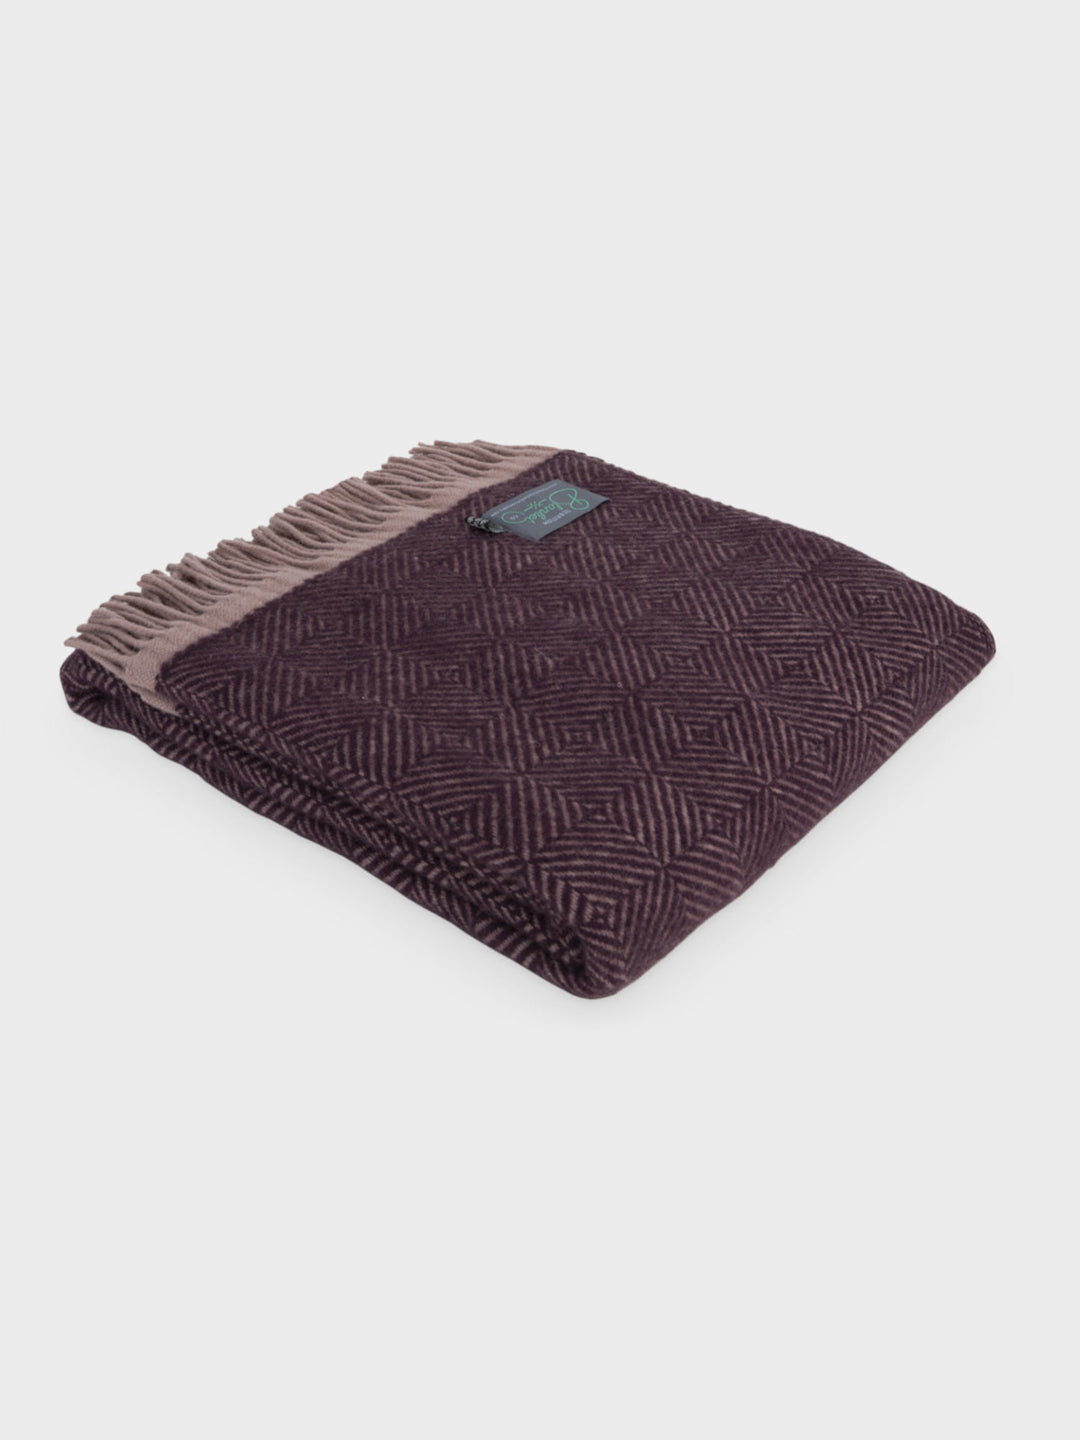 A folded purple Wildweave wool throw by The British Blanket Company.